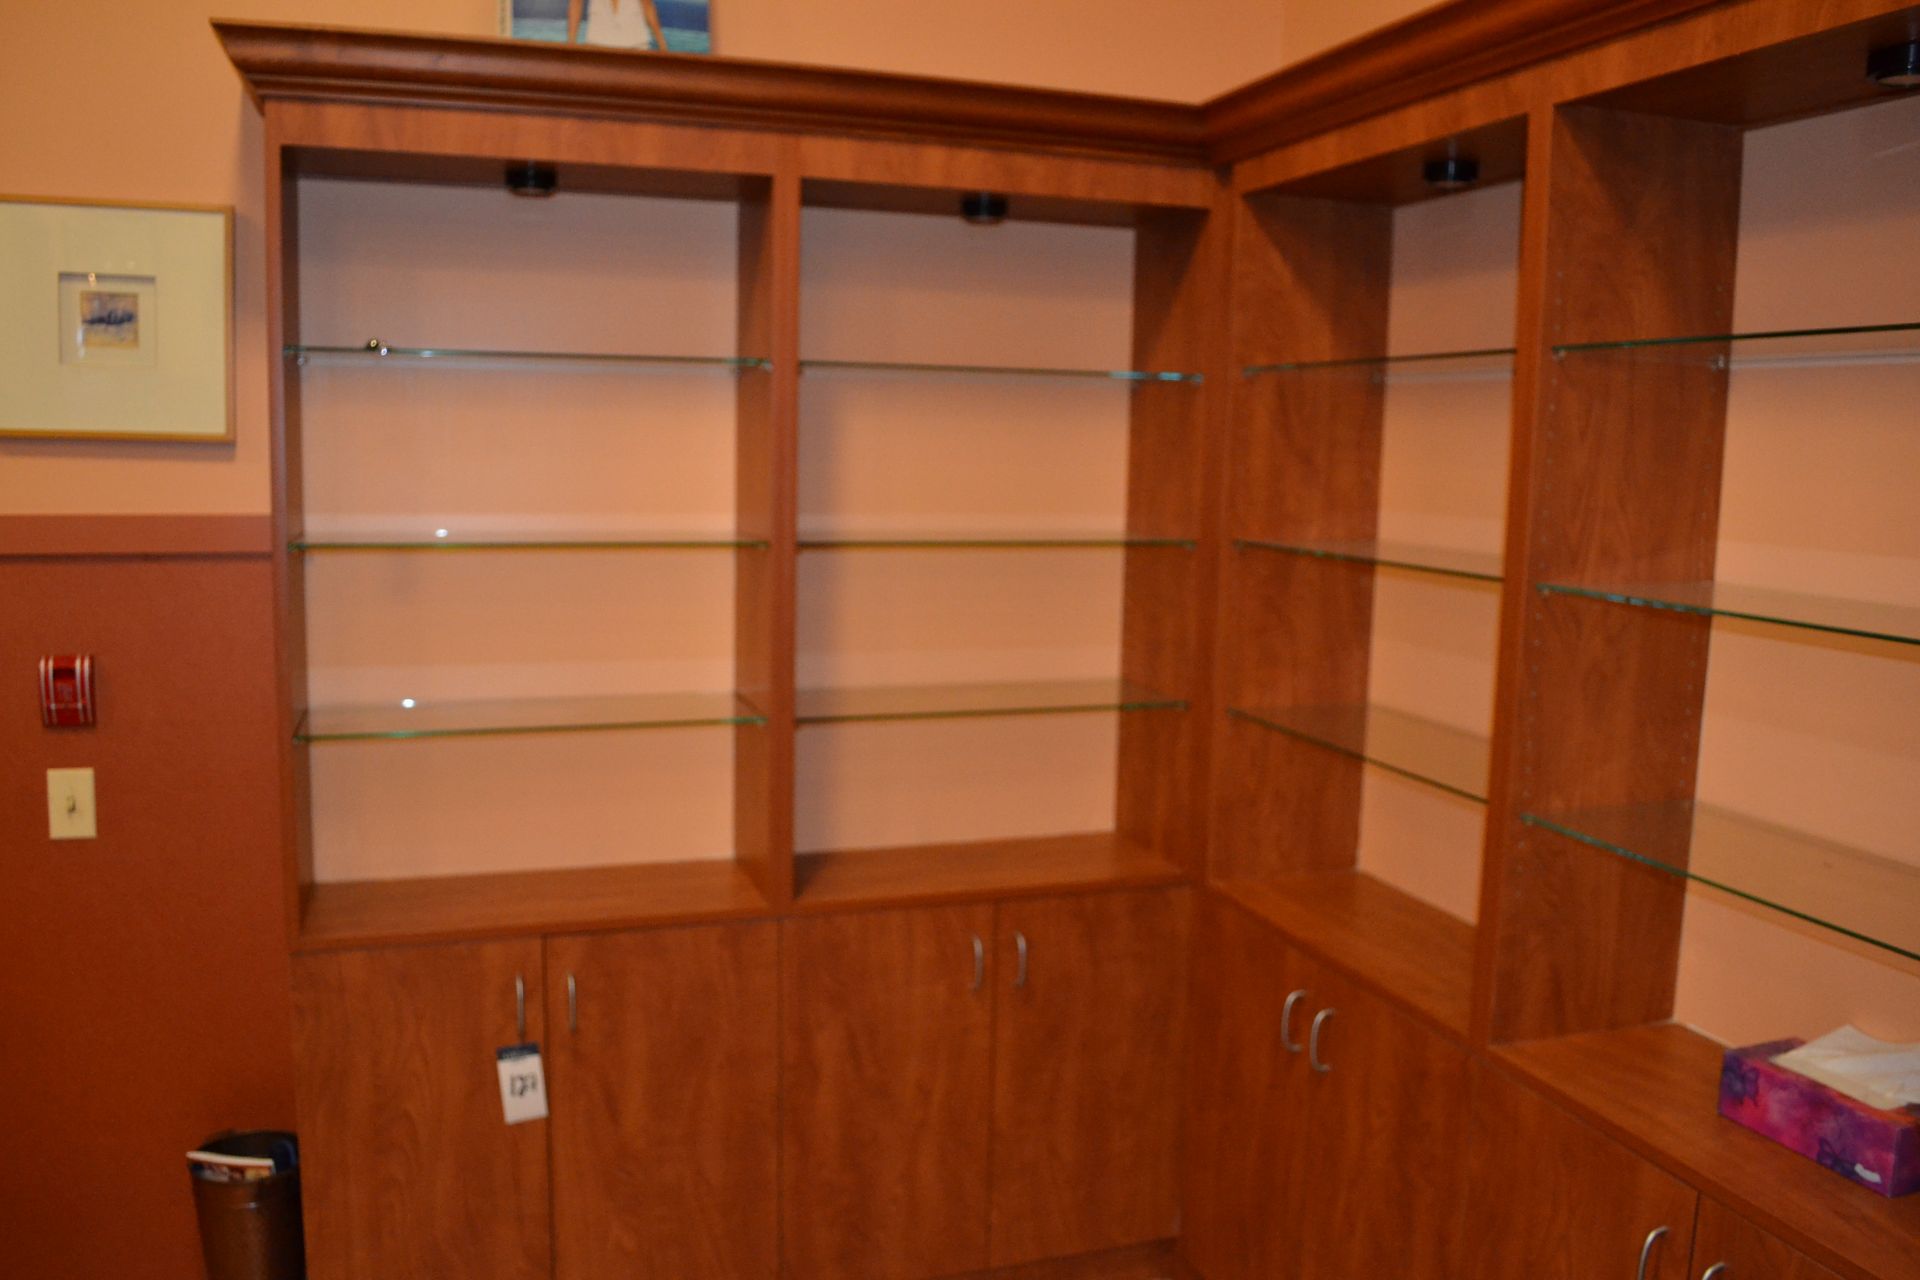 Cherry Formica Corner Shelving w/ Bottom Cabinets - Image 2 of 6